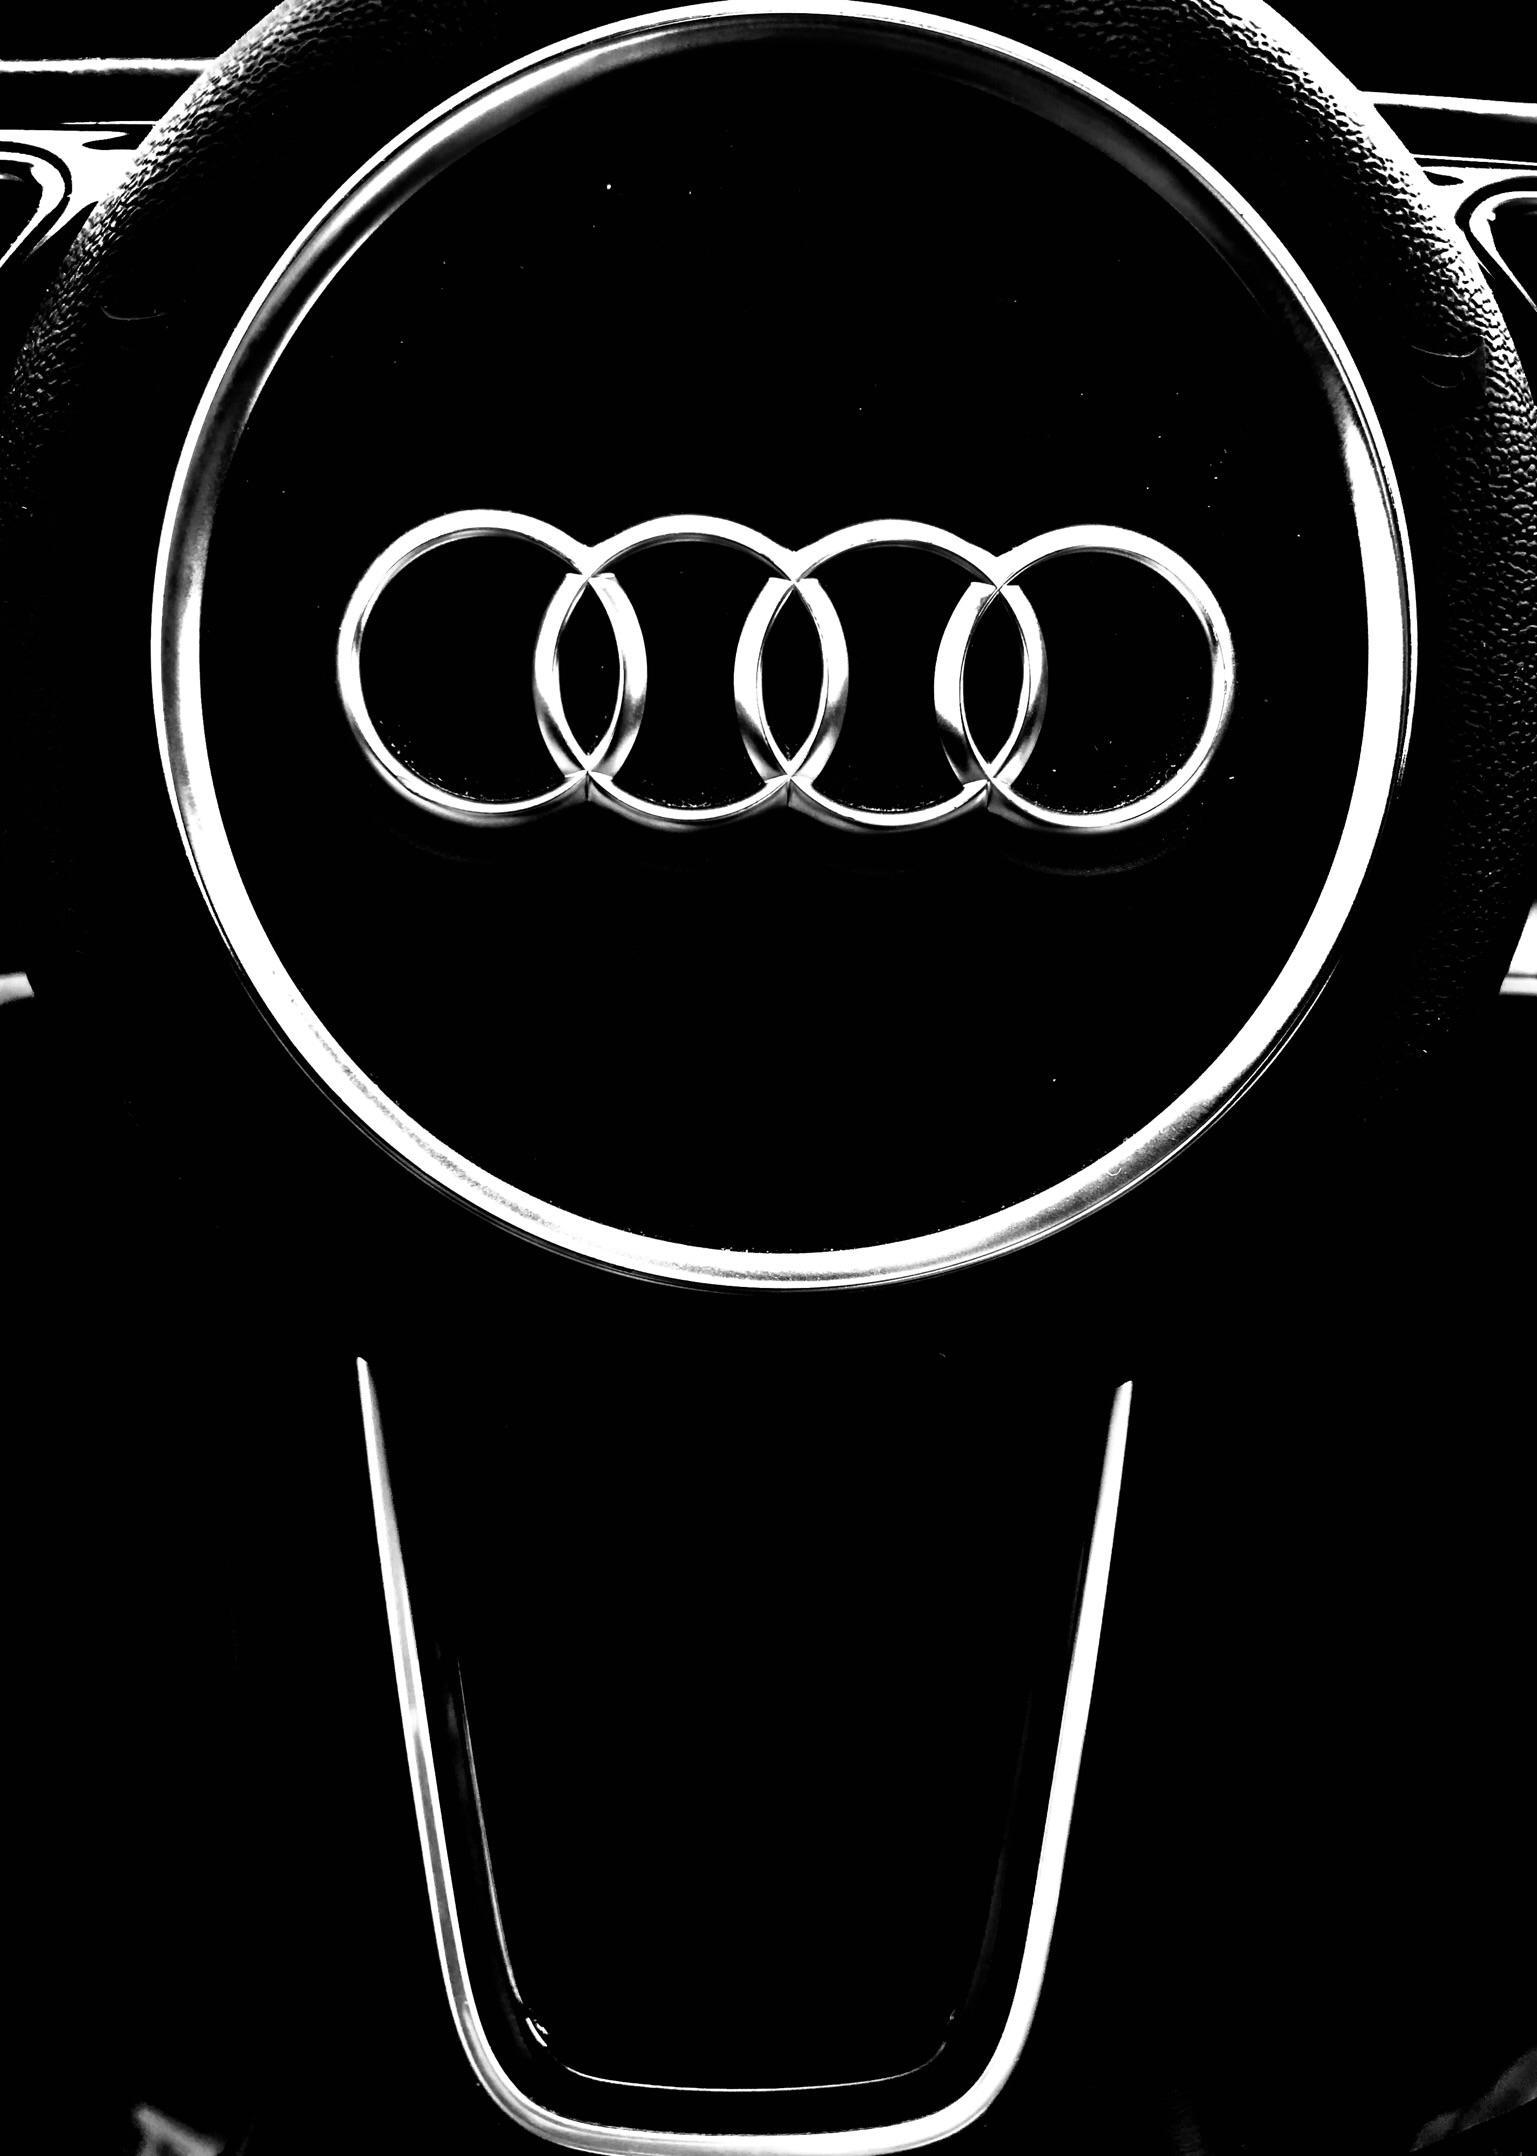 For Audi lovers